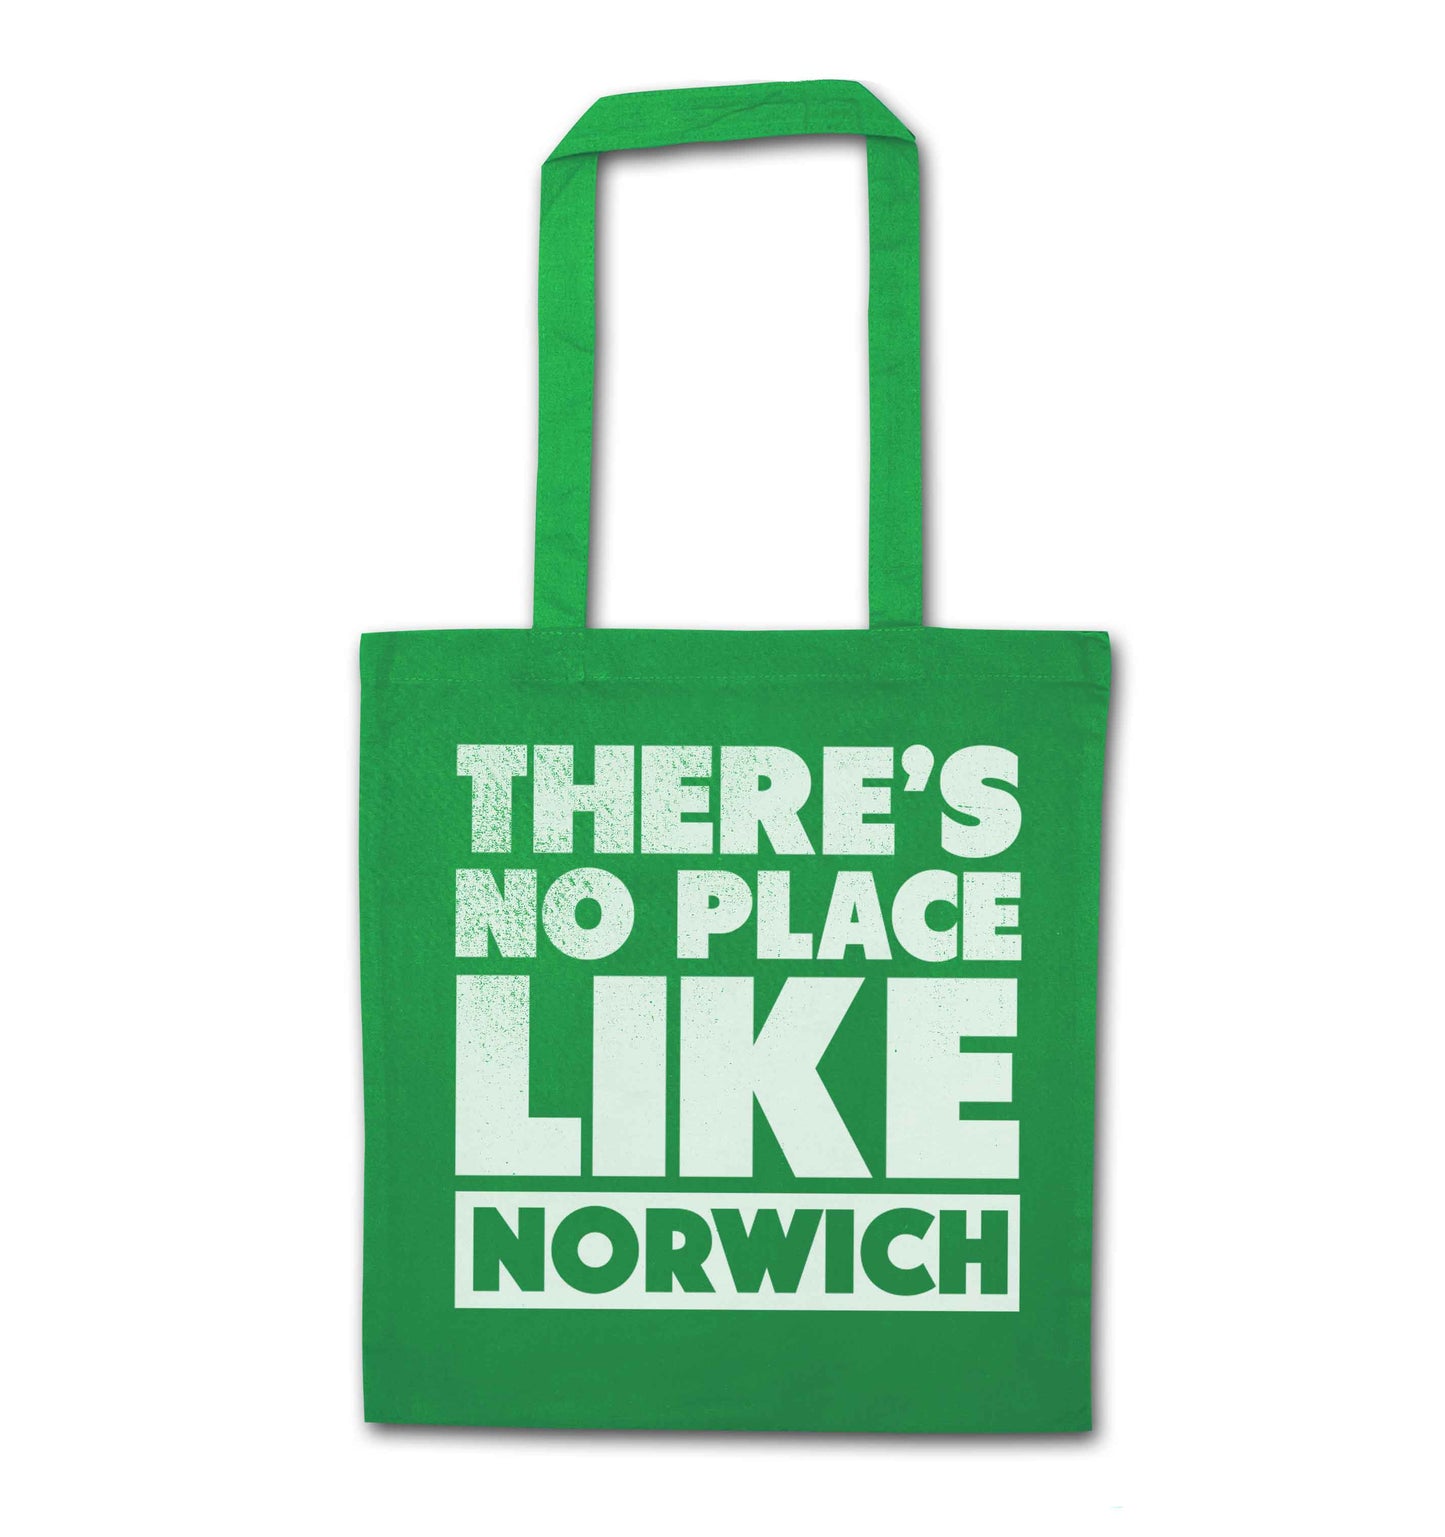 There's no place like Norwich green tote bag